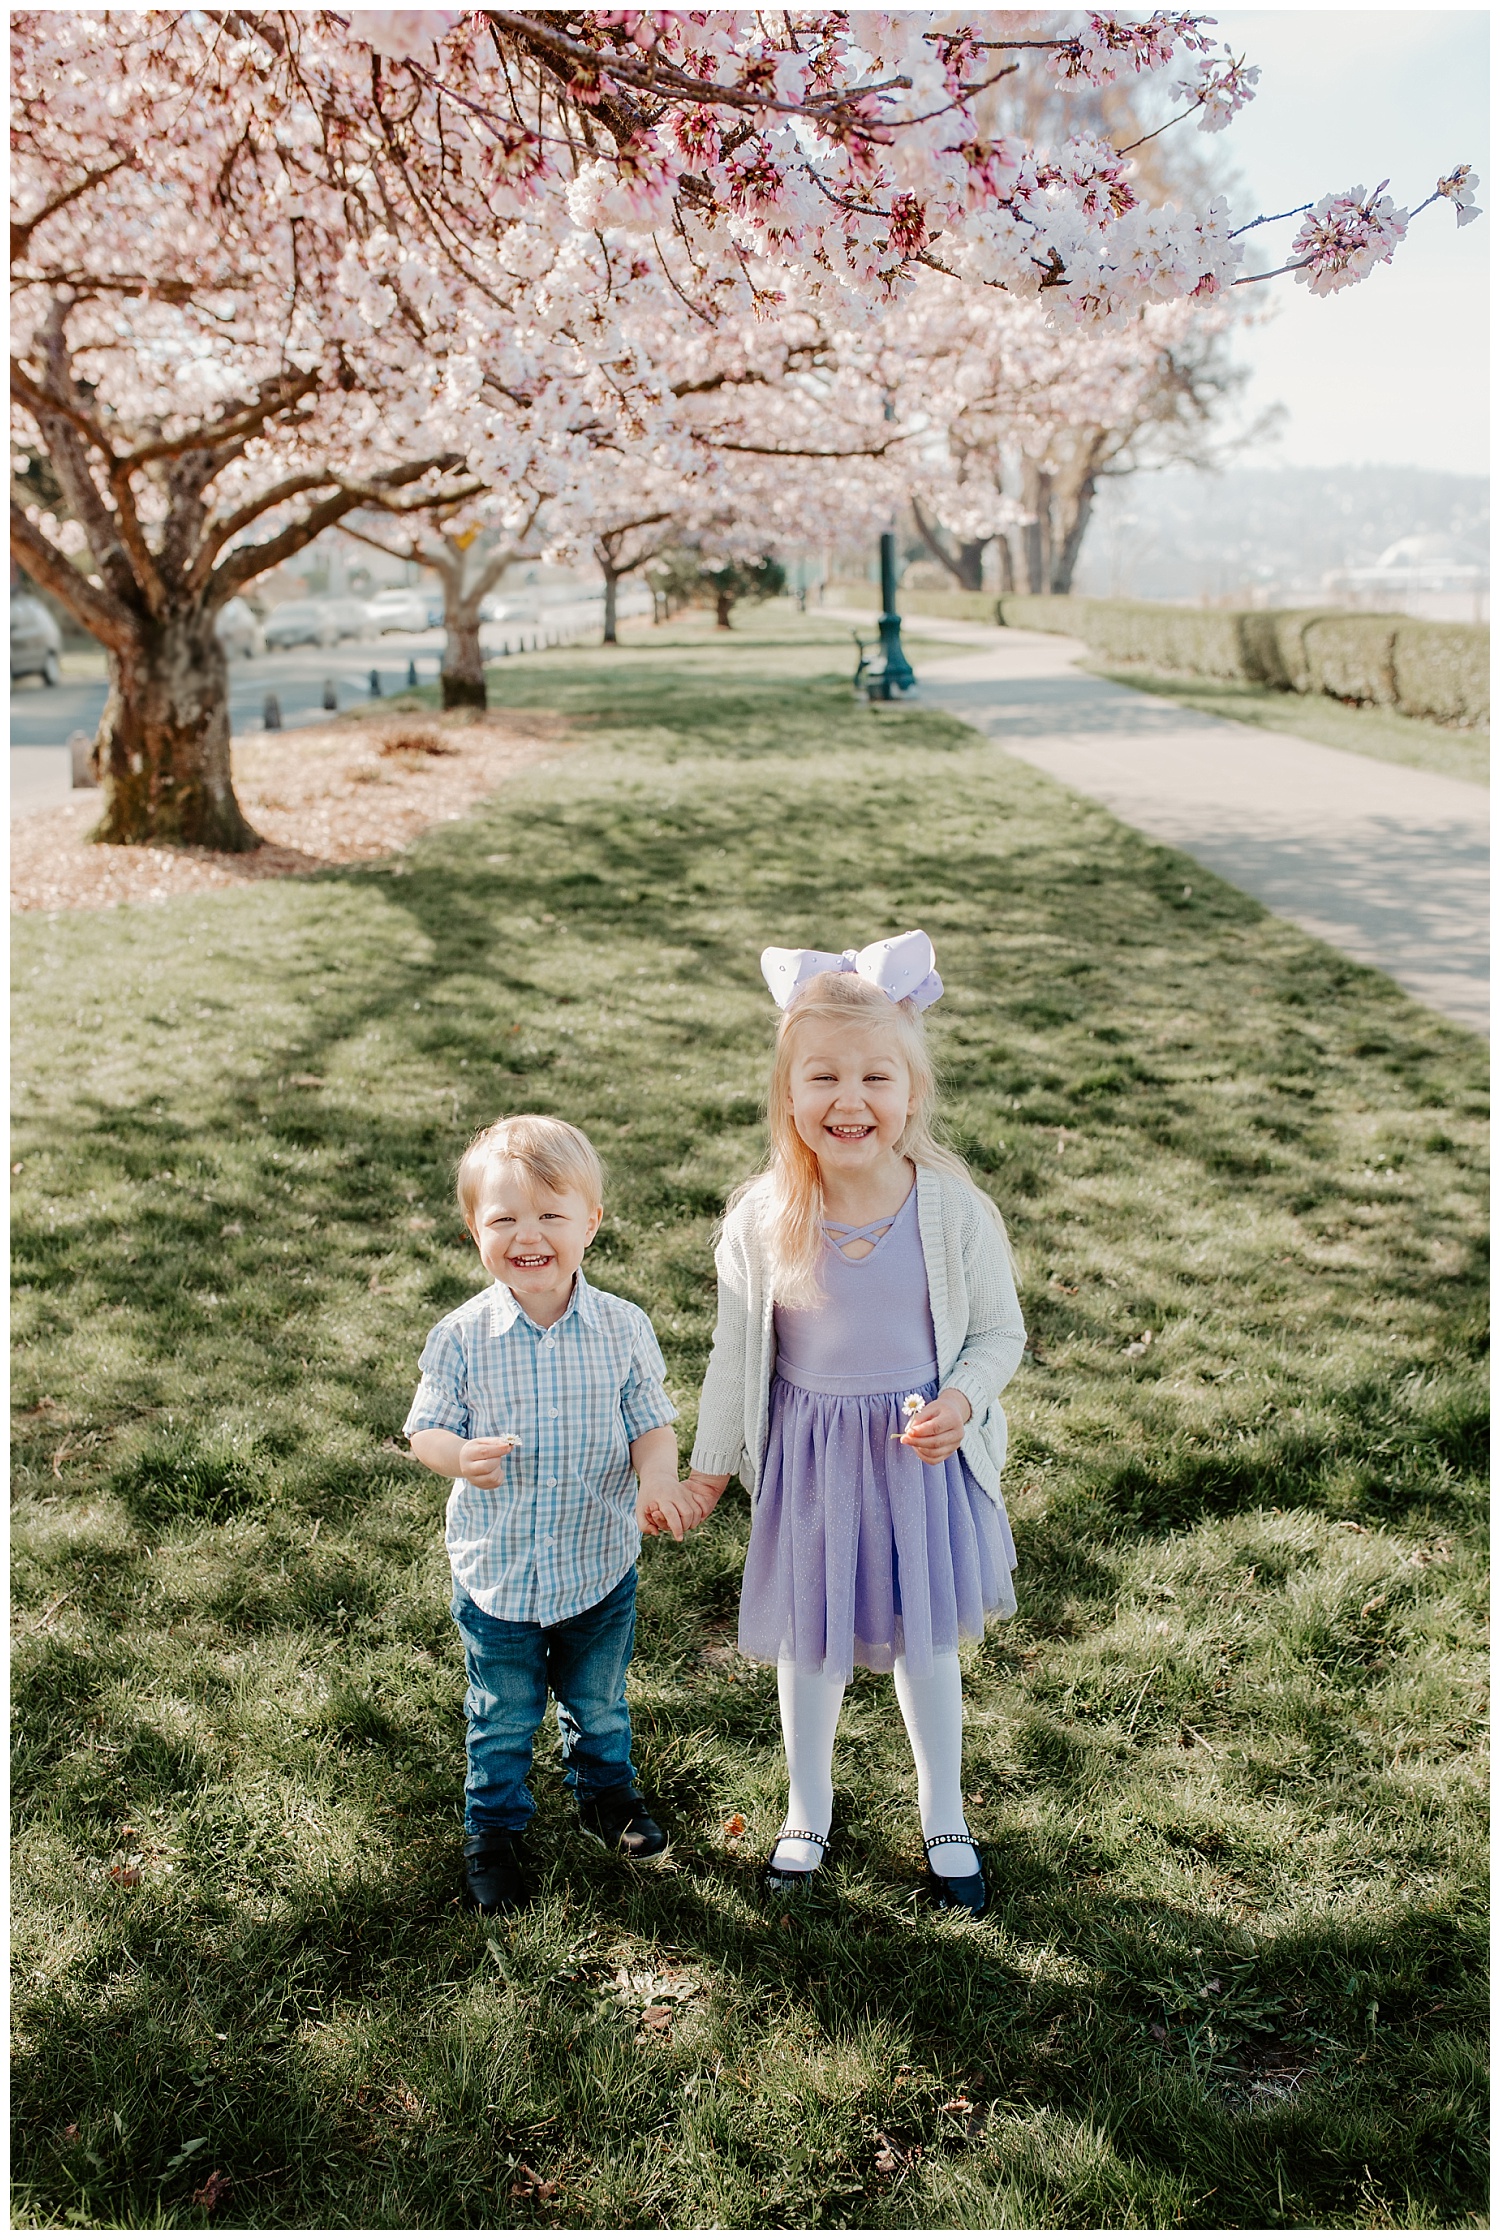 spring blossom family pictures at Grand Avenue, Everett Washington  + Snohomish Family Photographer 